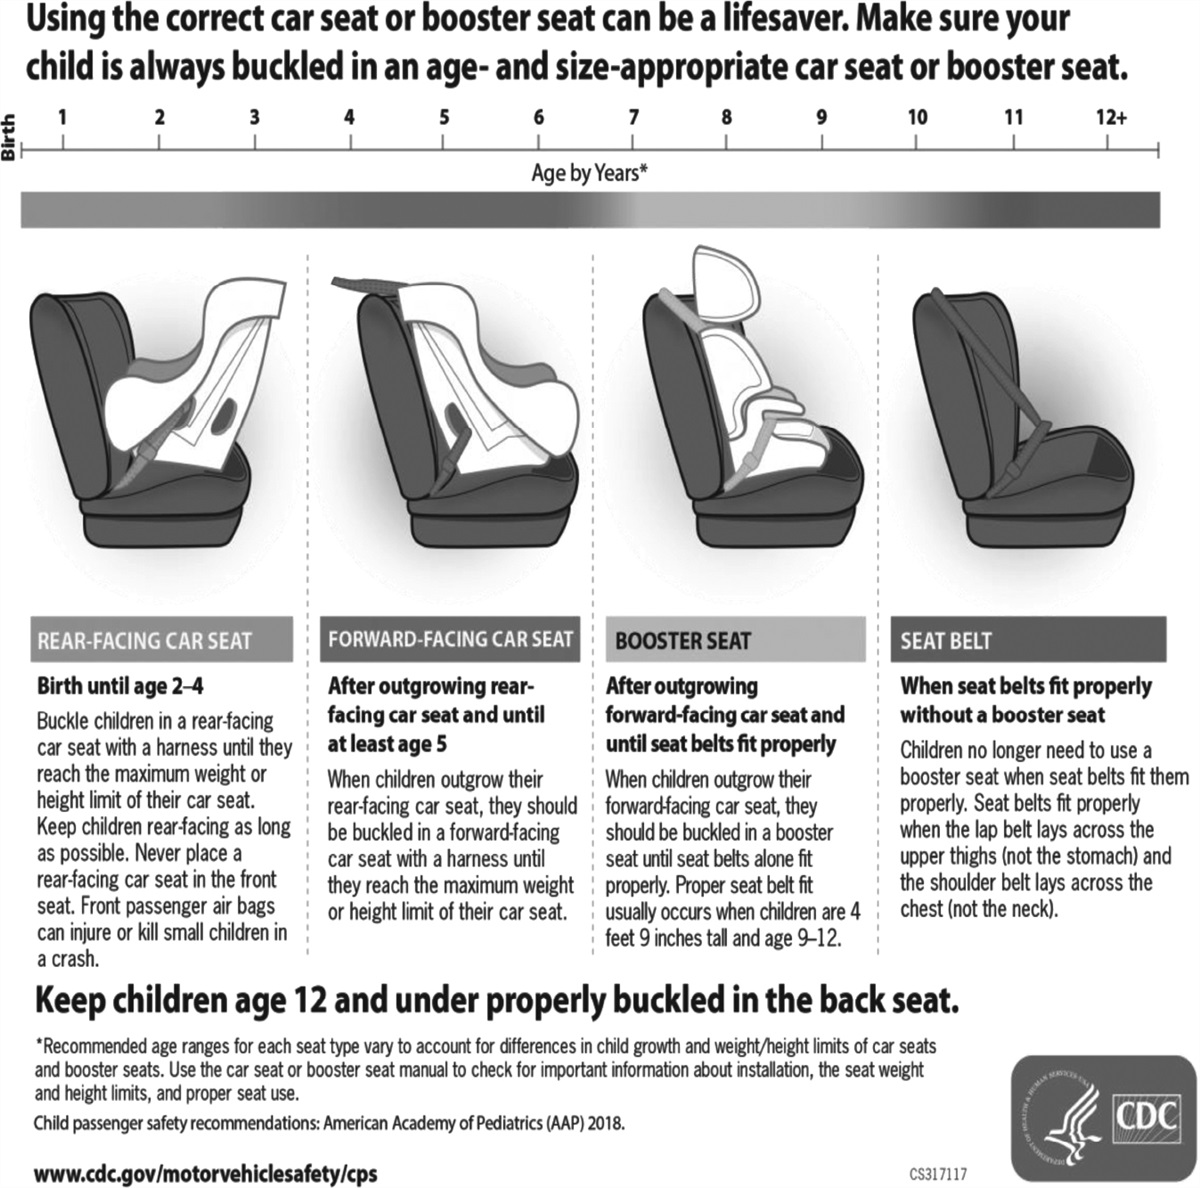 Standardizing Child Passenger Safety Screening in the Emergency Department: A Quality Improvement Study